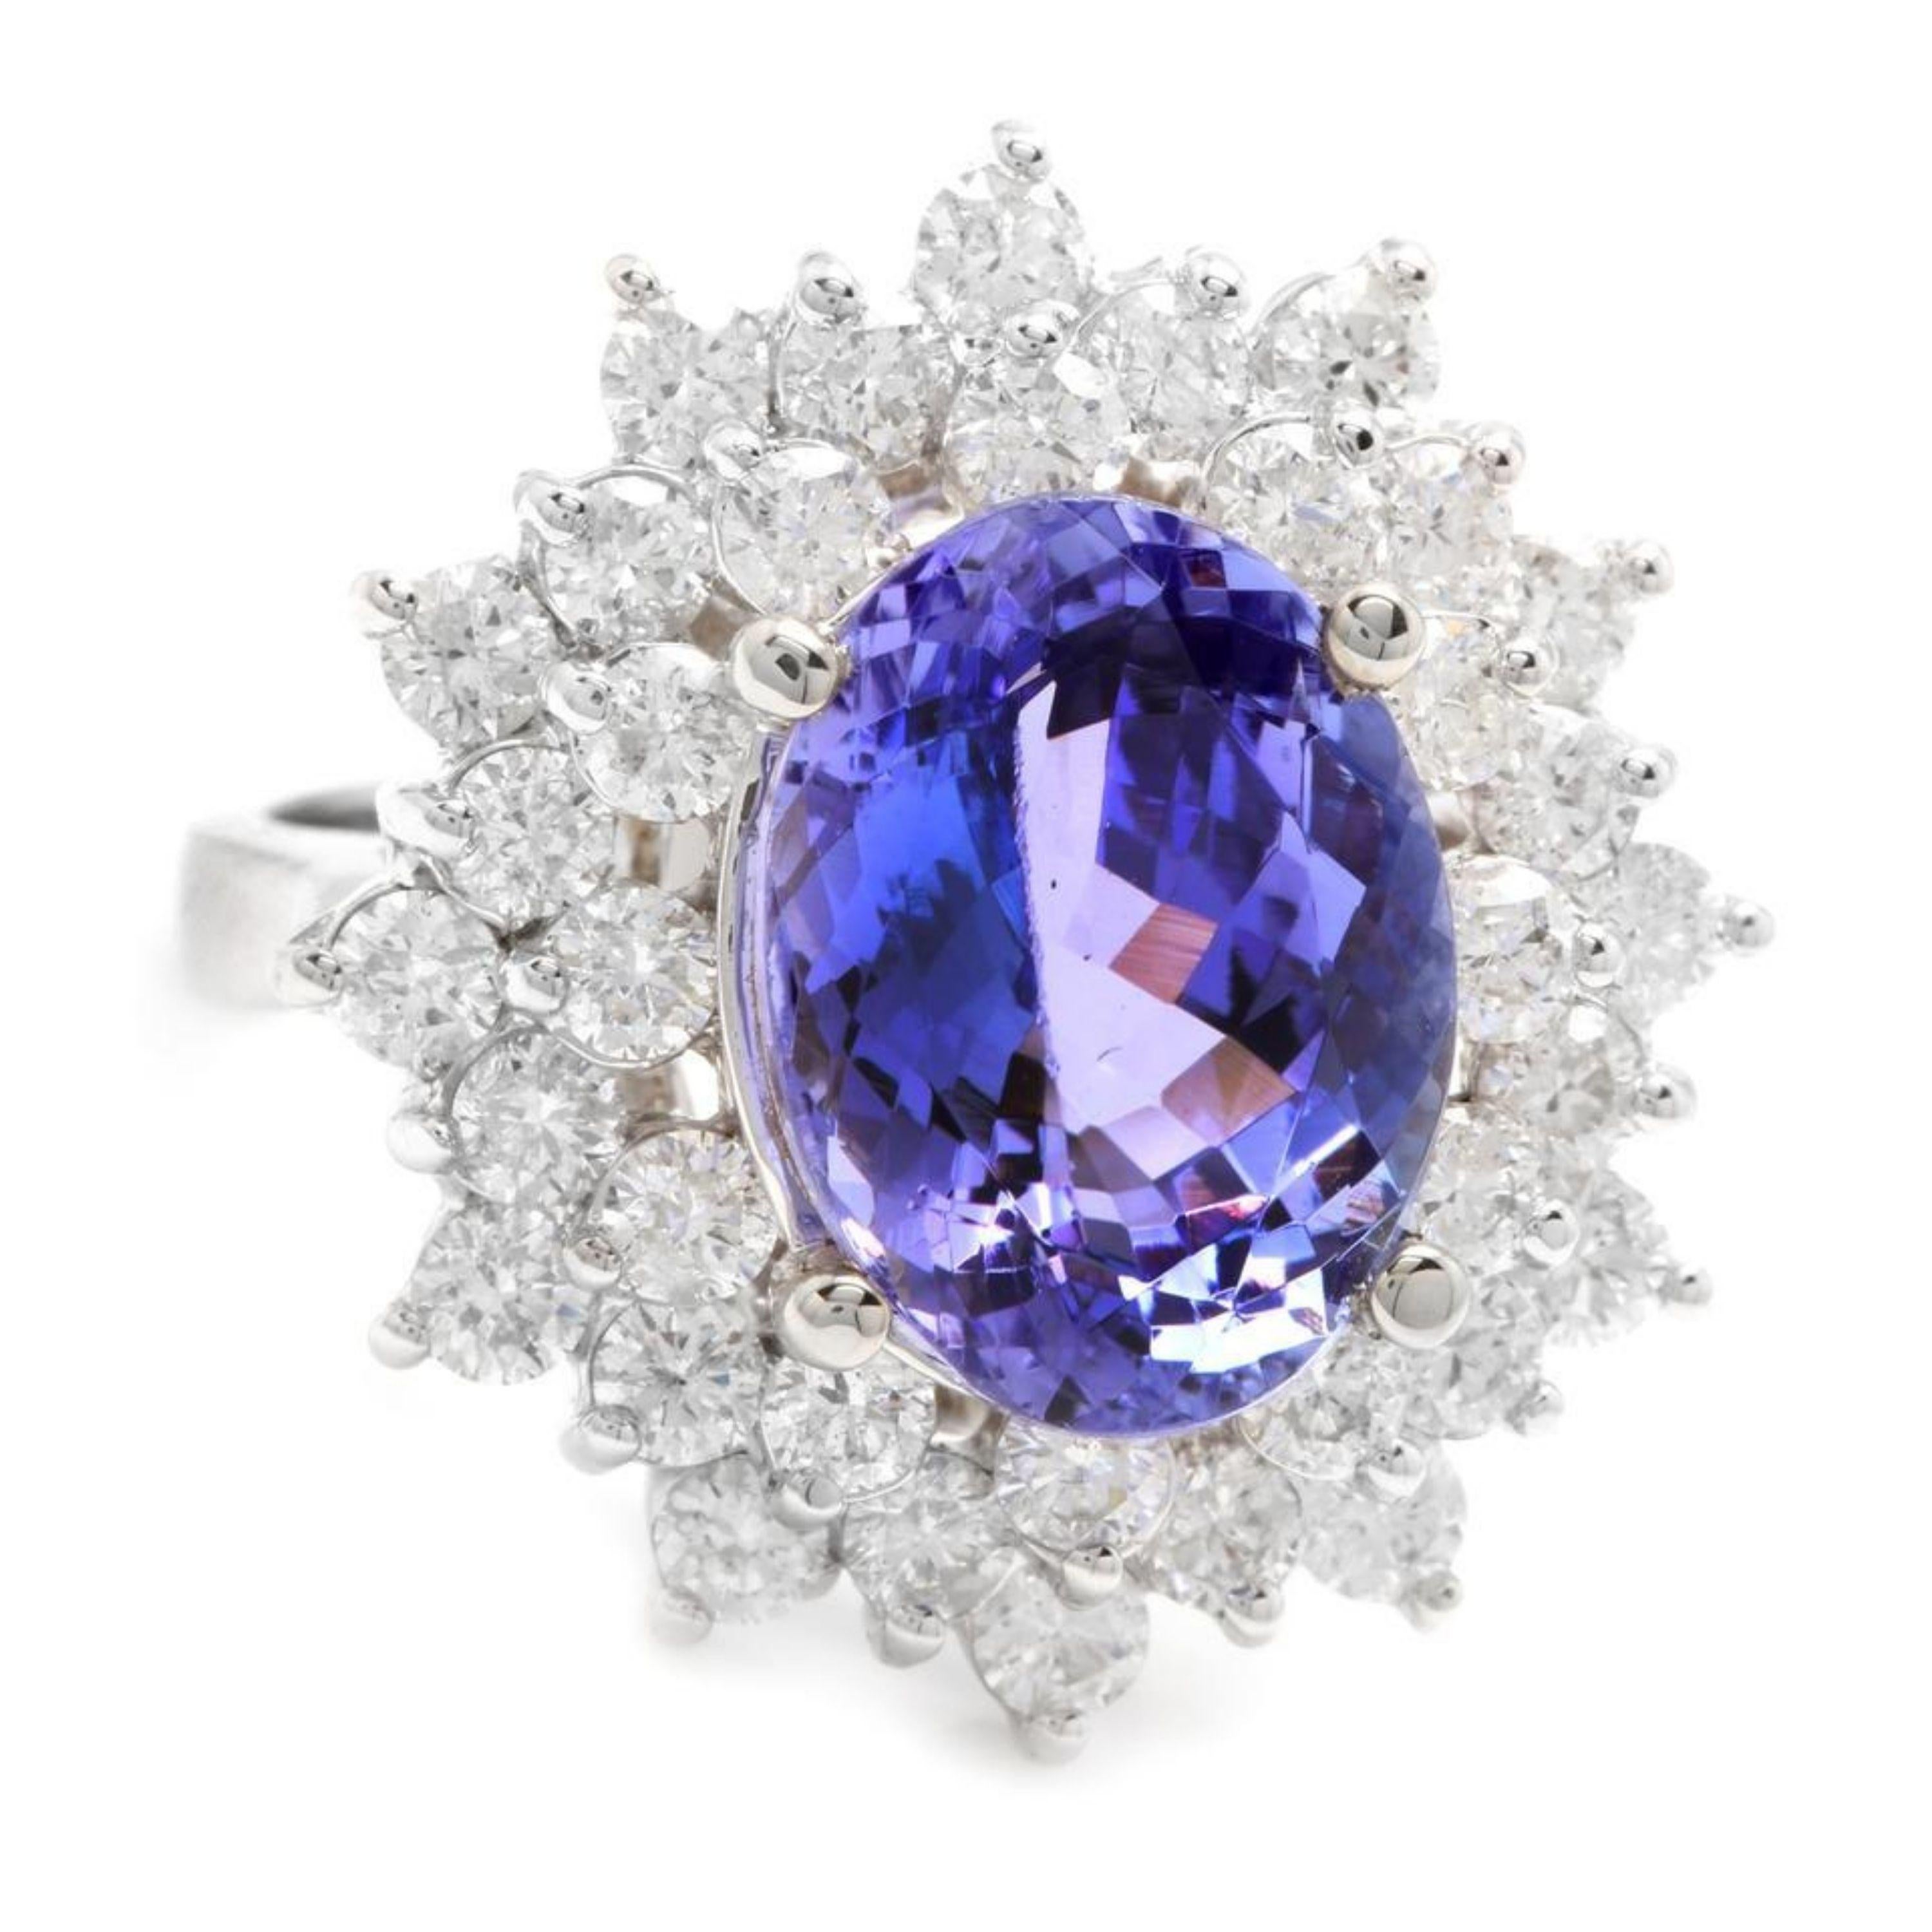 7.30 Carats Natural Very Nice Looking Tanzanite and Diamond 14K Solid White Gold Ring

Total Natural Oval Cut Tanzanite Weight is: Approx. 5.50 Carats

Tanzanite Measures: Approx. 12.80 x 9.40mm

Natural Round Diamonds Weight: Approx. 1.80 Carats